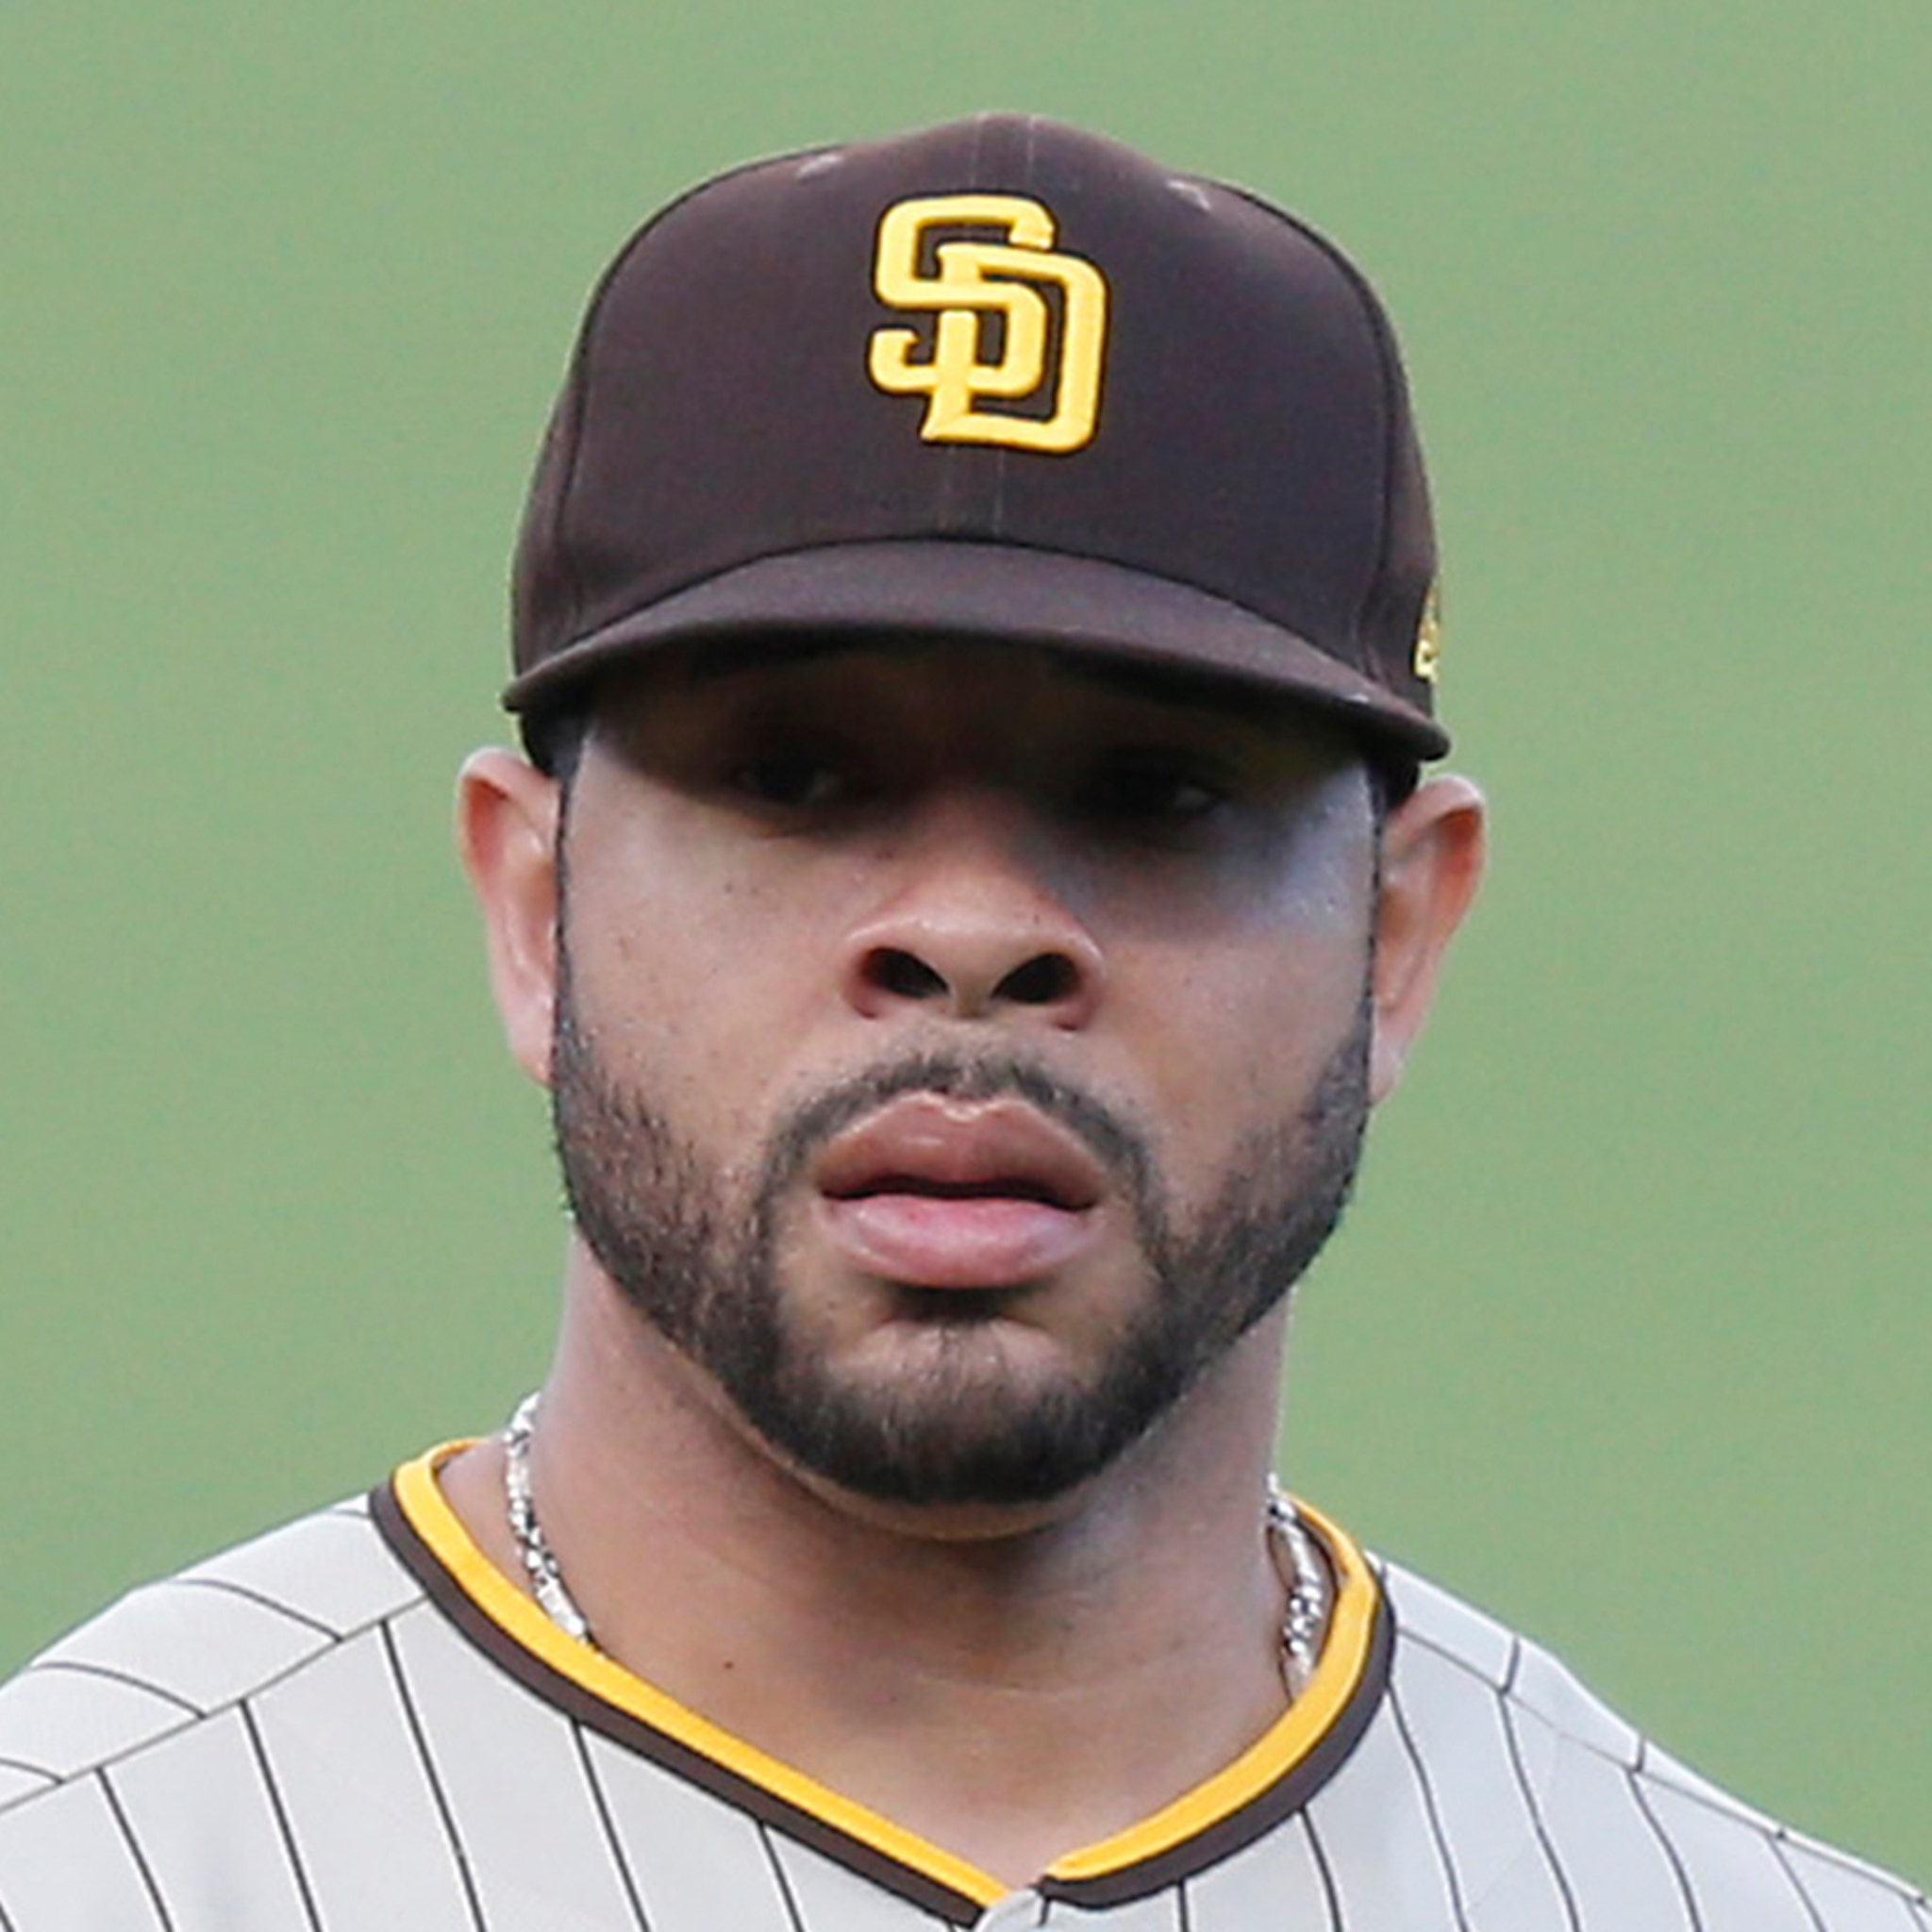 Padres outfielder Tommy Pham stabbed outside strip club